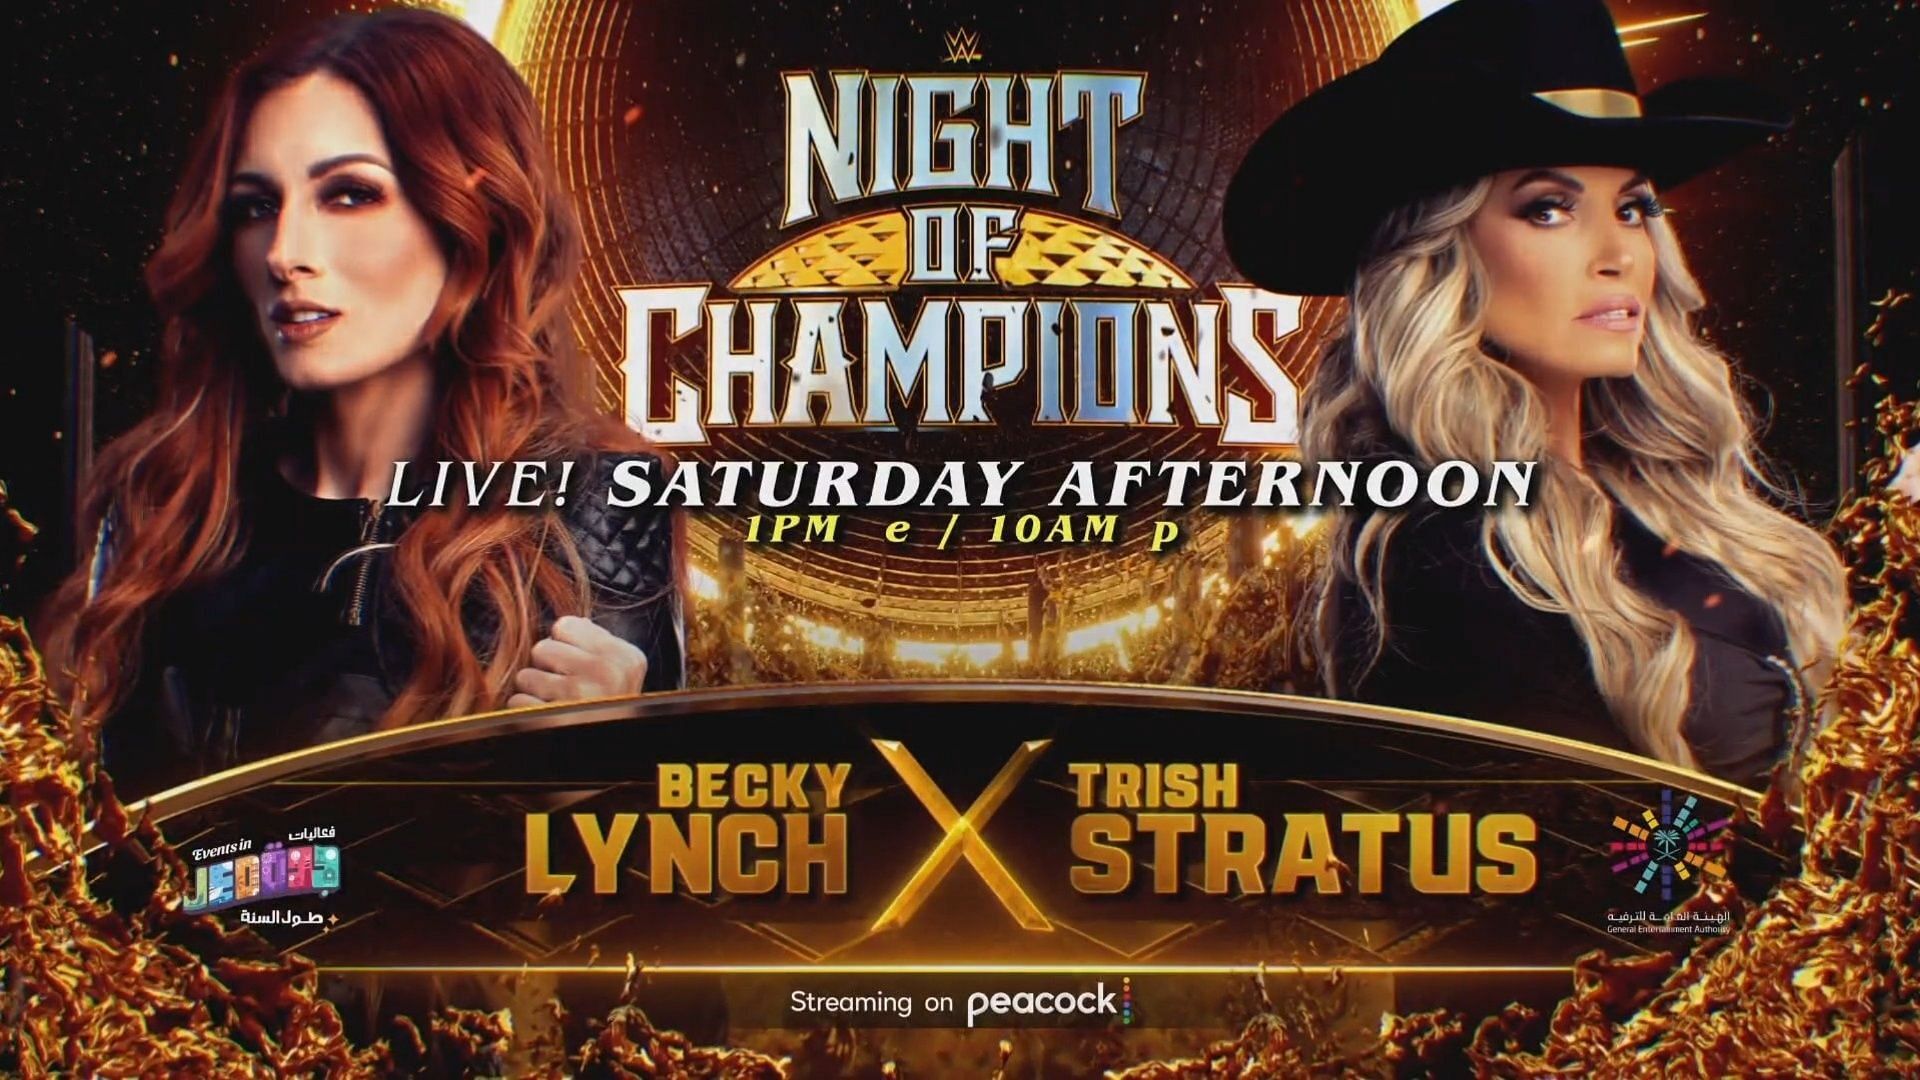 Becky Lynch versus Trish Stratus for WWE Night of Champions 2023 was made official on RAW this week.